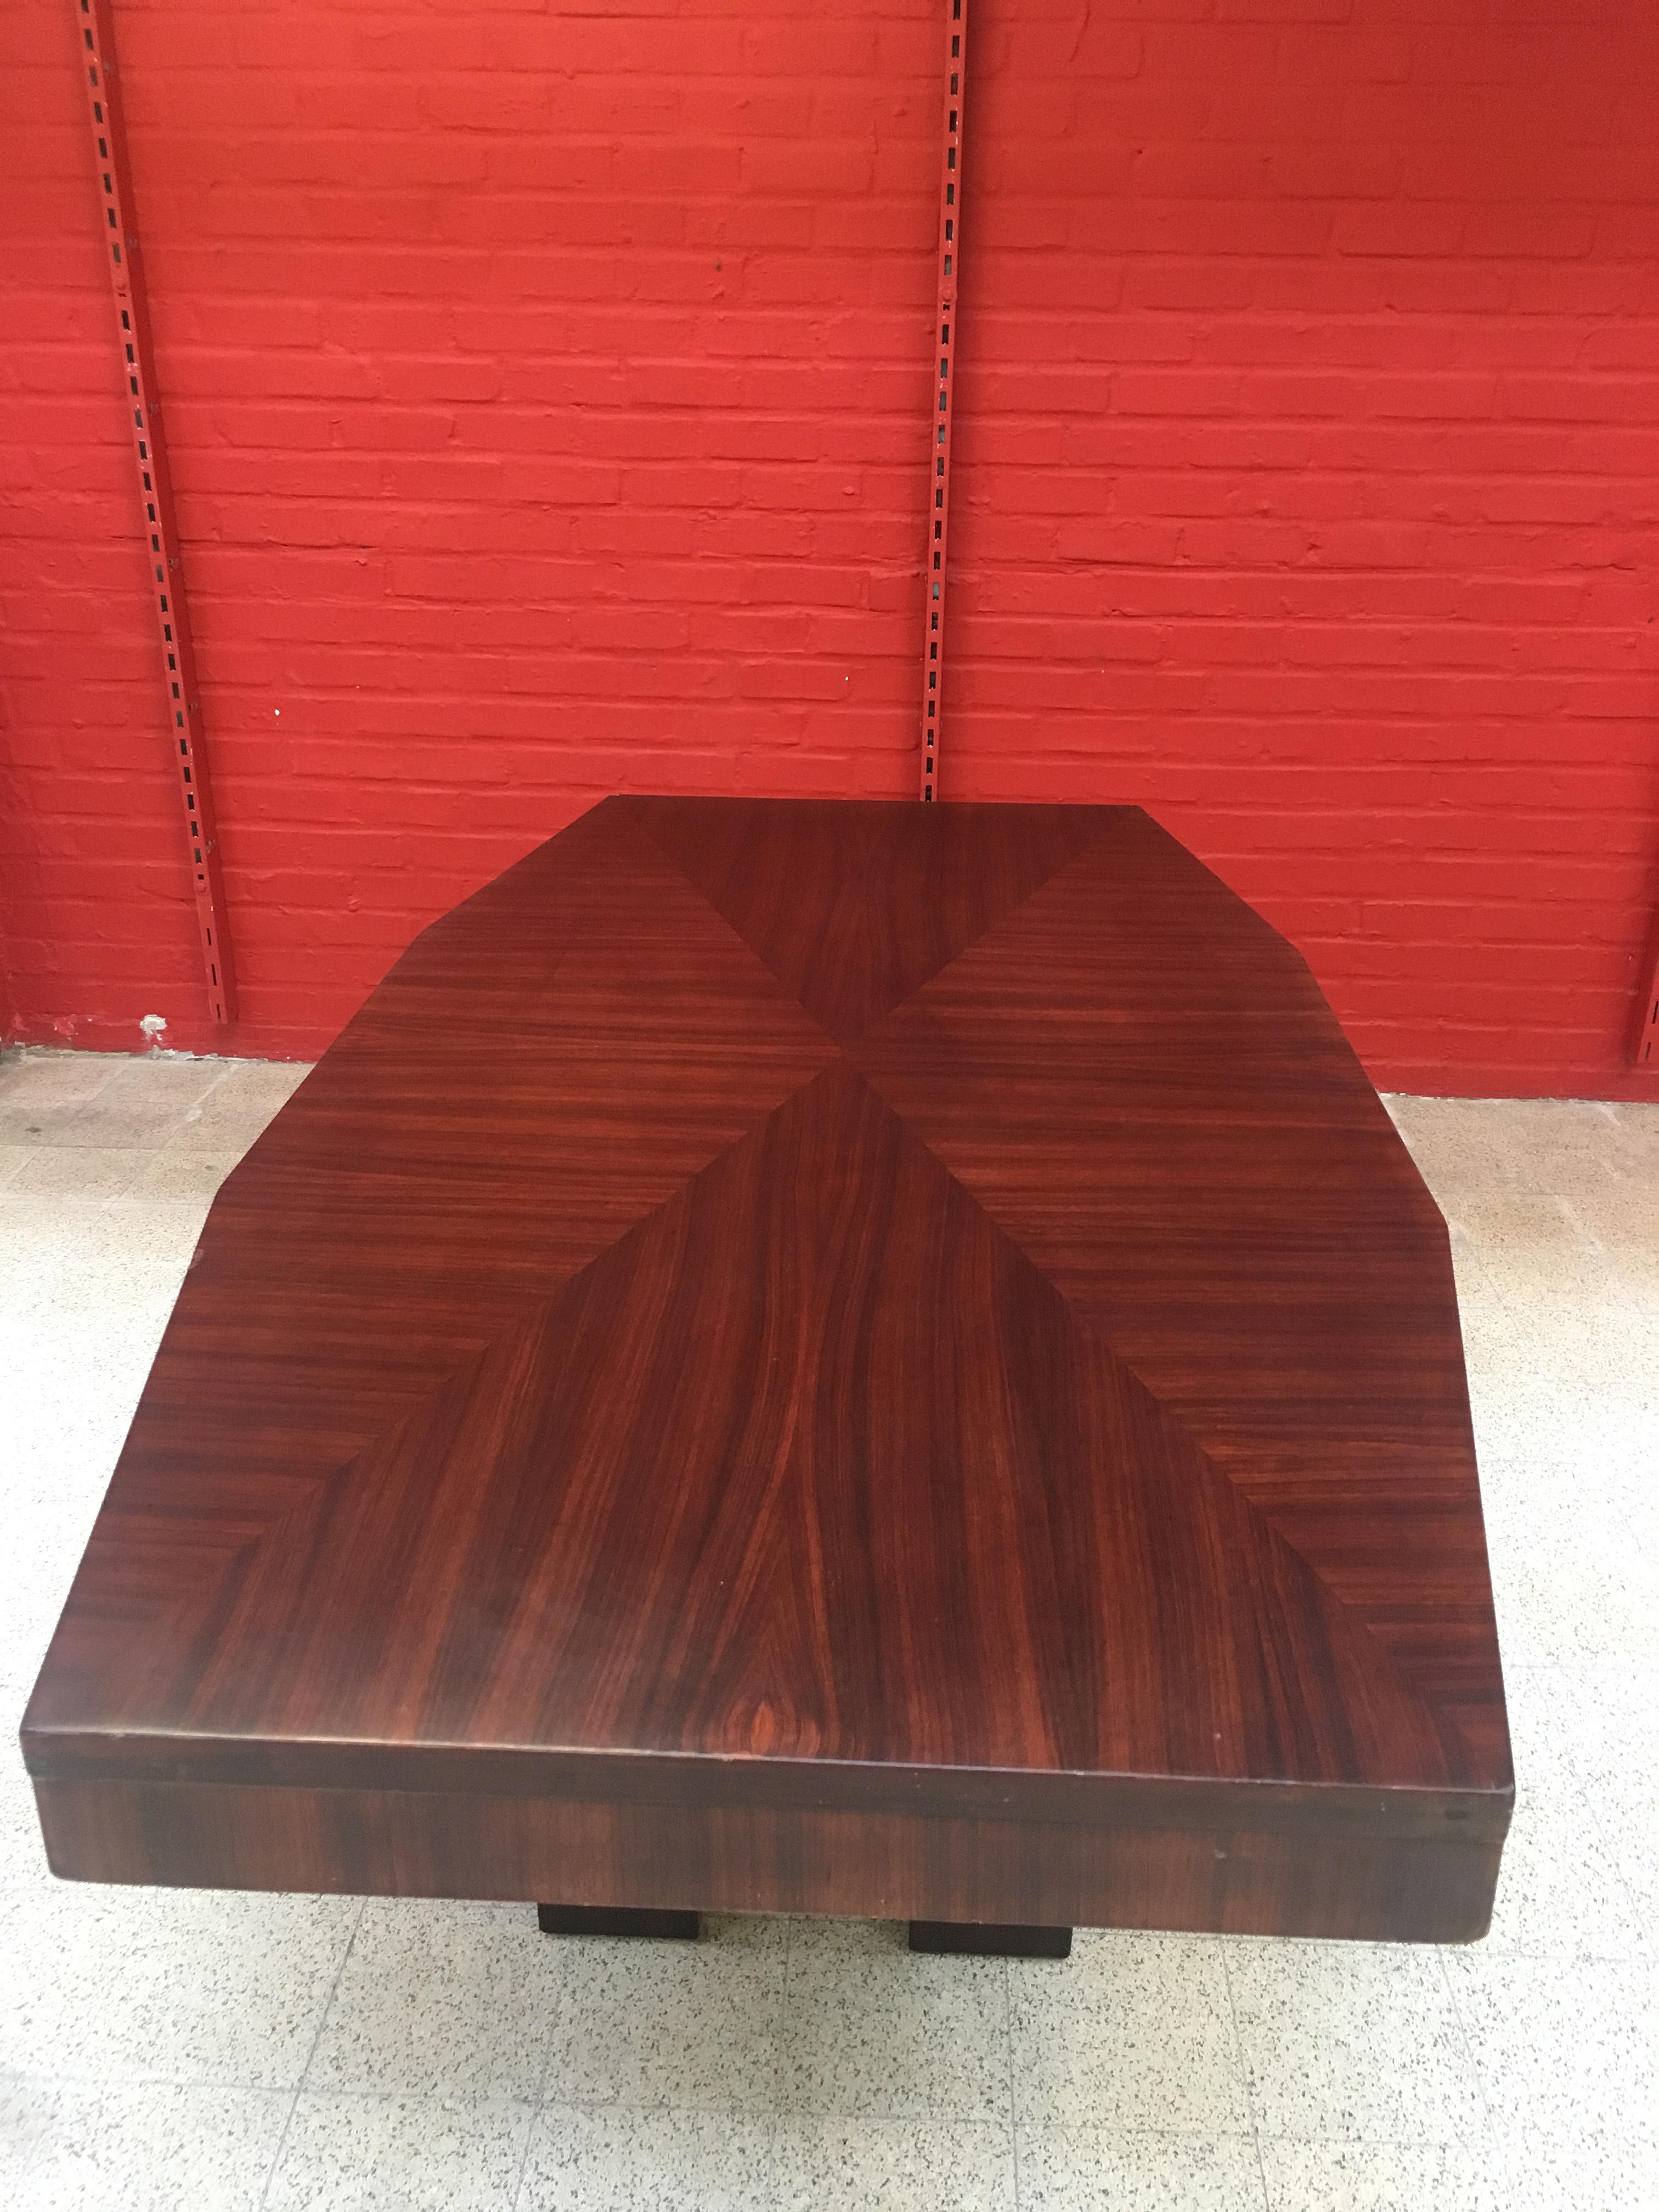 French Modernist Art Deco Table circa 1930-1940 Attributed to Jacques Adnet For Sale